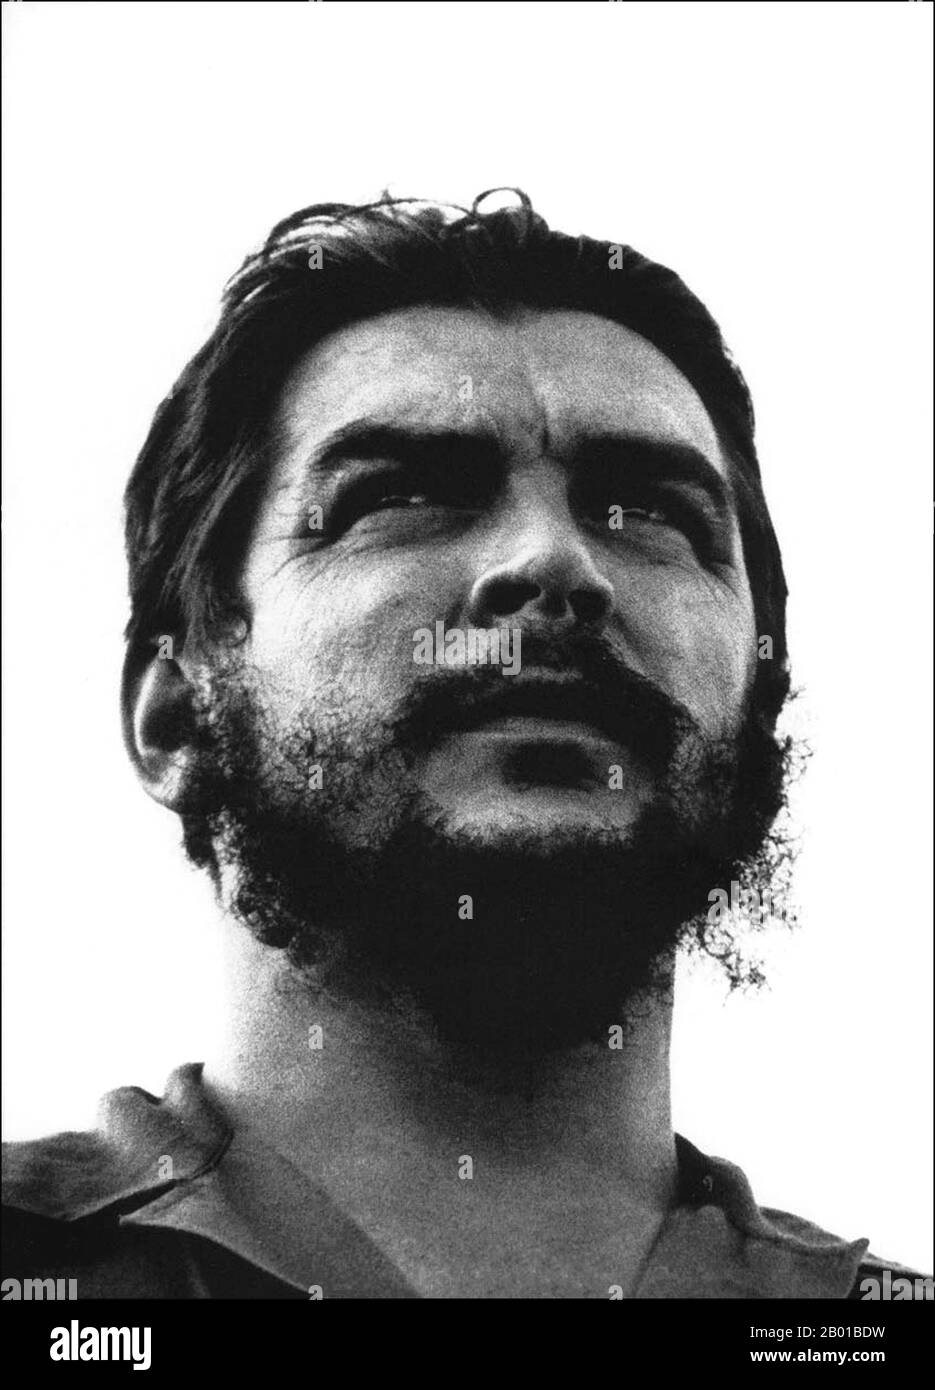 Cuba/Argentina: Ernesto 'Che' Guevara (14 June 1928 - 9 October 1967), commonly known as El Che or simply Che, Argentine Marxist revolutionary, physician, author, intellectual, guerrilla leader, diplomat and military theorist, as well as a major figure of the Cuban Revolution. Photo by Osvaldo Salas (1914-1992, out of copyright), c. 1960.  While living in Mexico City, Guevara met Raúl and Fidel Castro, joined their 26th of July Movement, and sailed to Cuba aboard the yacht, Granma, with the intention of overthrowing U.S.-backed Cuban dictator Fulgencio Batista. Stock Photo